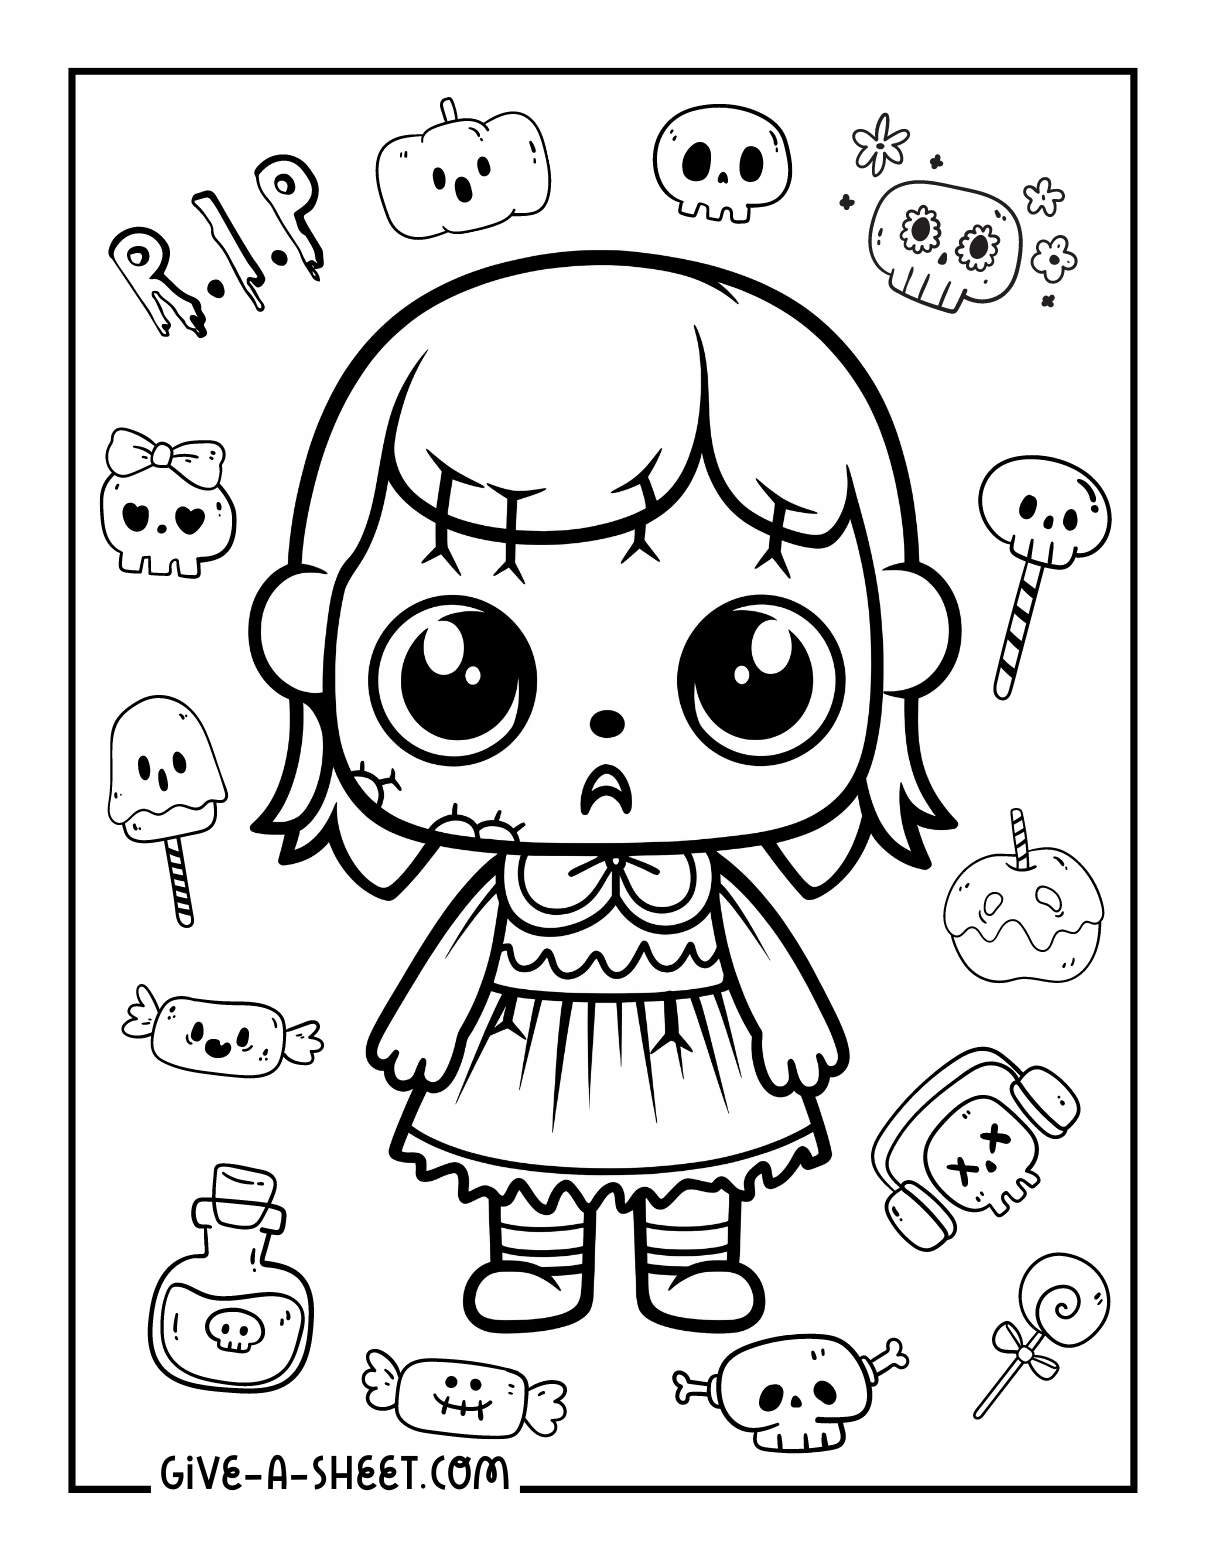 Cute zombie girl illustrations coloring page for kids.